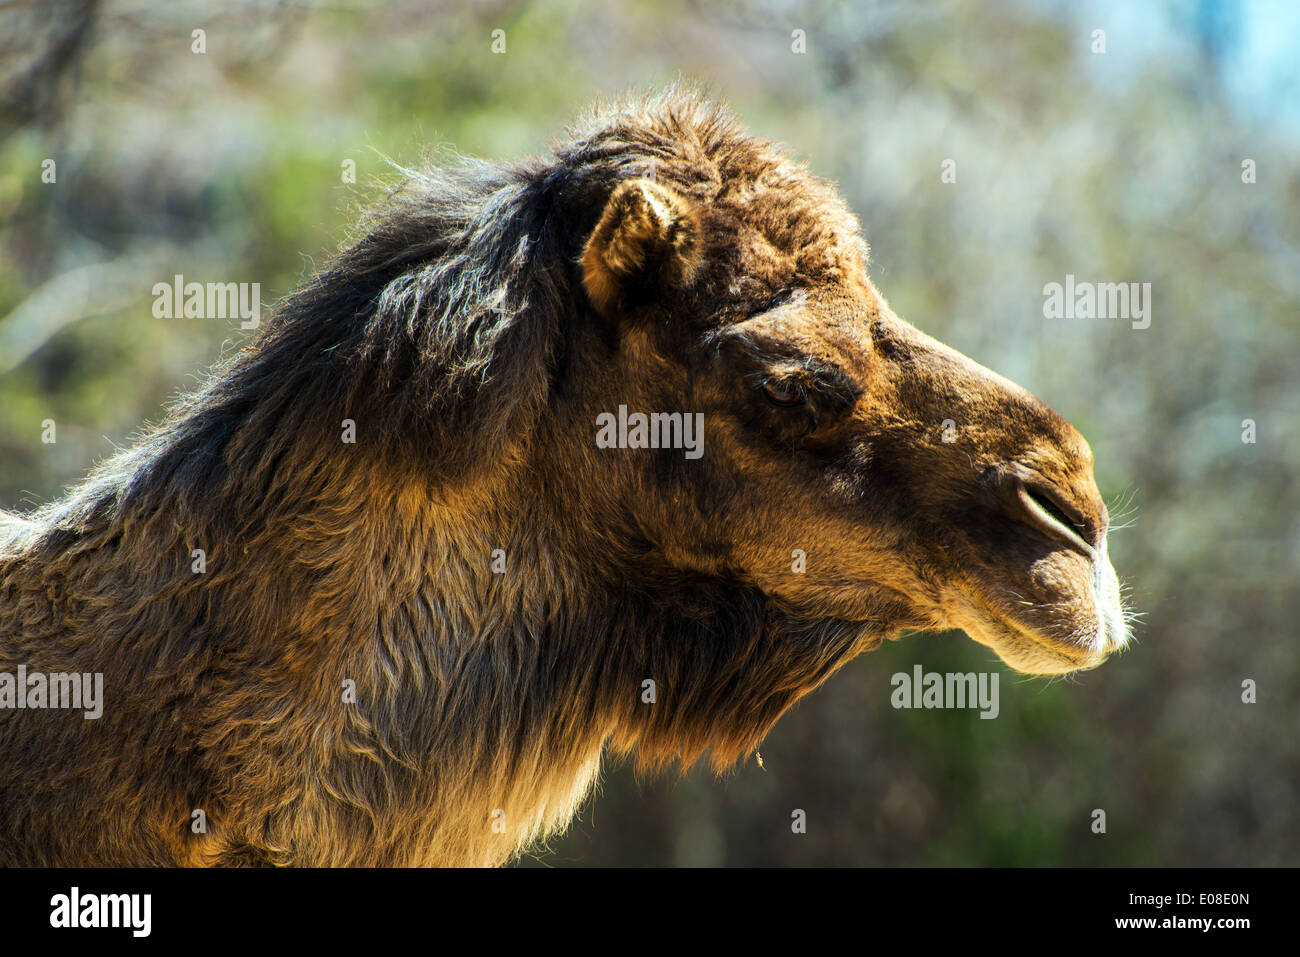 Bactrian Camel Native to the Steppes of Central Asia. Head Closeup. Camelus Bactrianus. Stock Photo